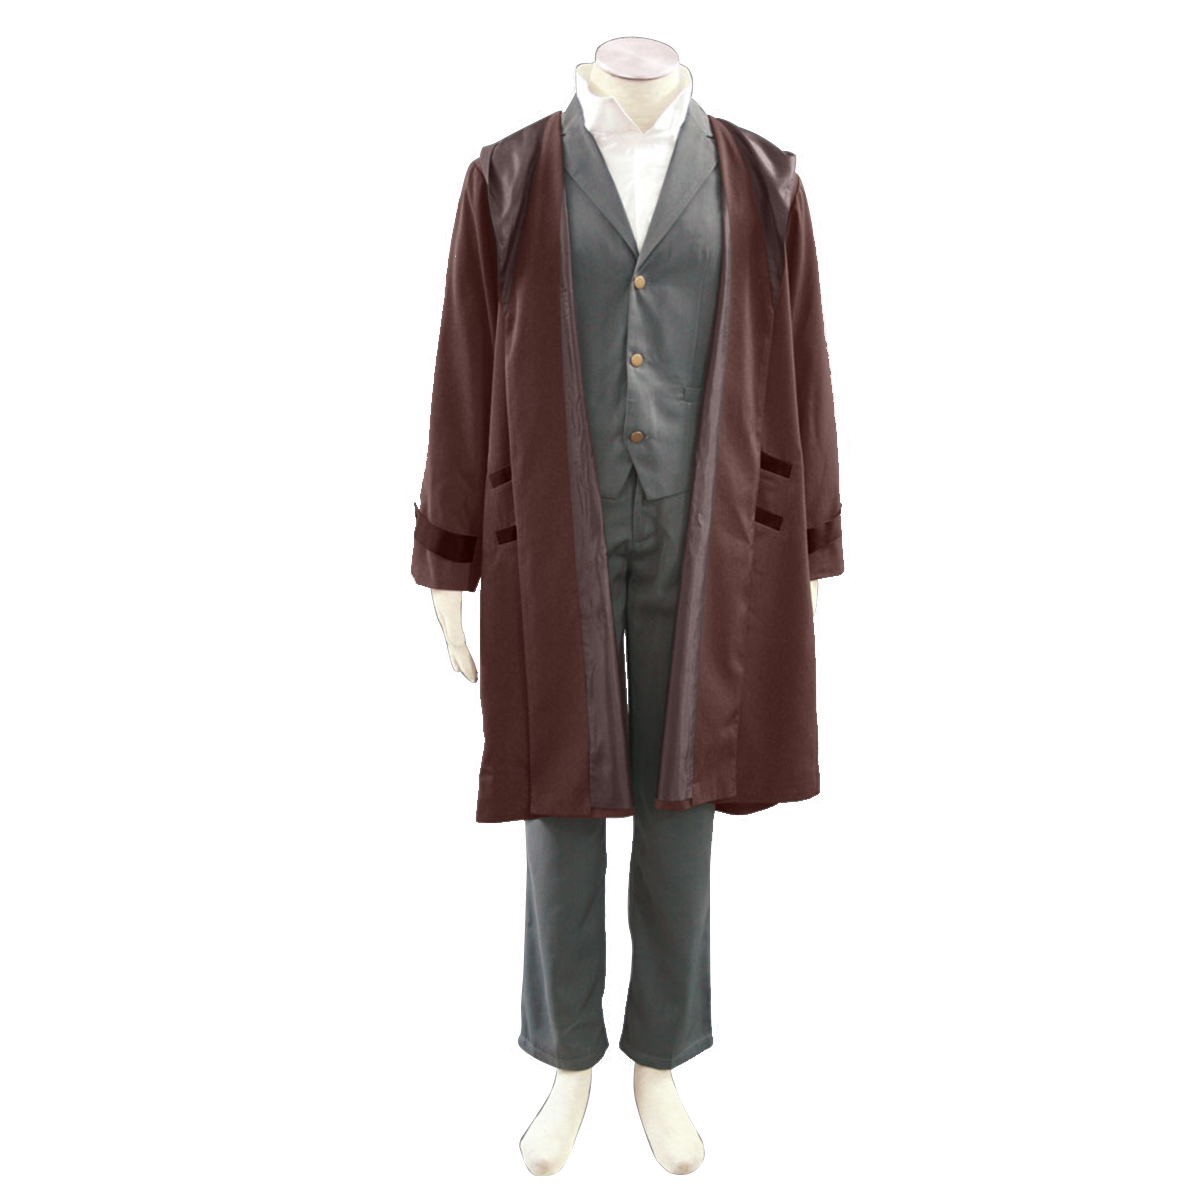 Fullmetal Alchemist Edward Elric 2 Anime Cosplay Costumes Outfit